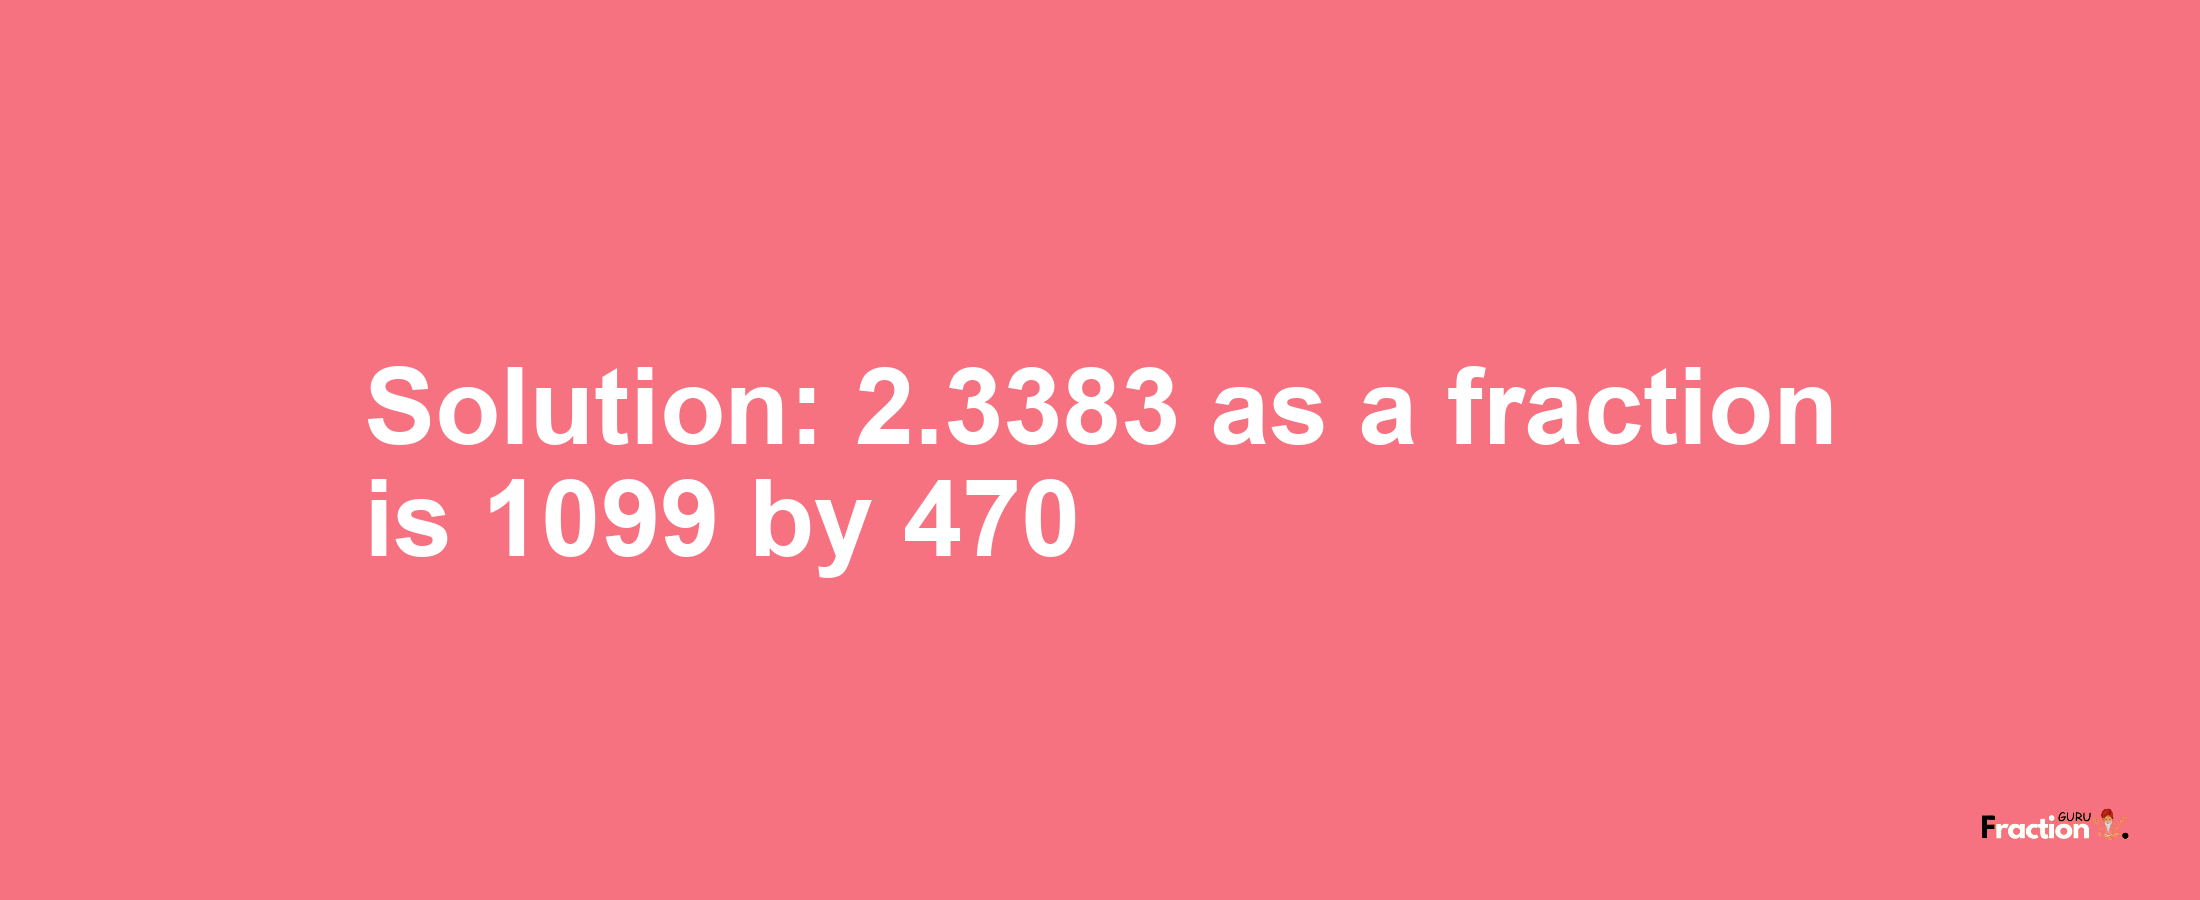 Solution:2.3383 as a fraction is 1099/470